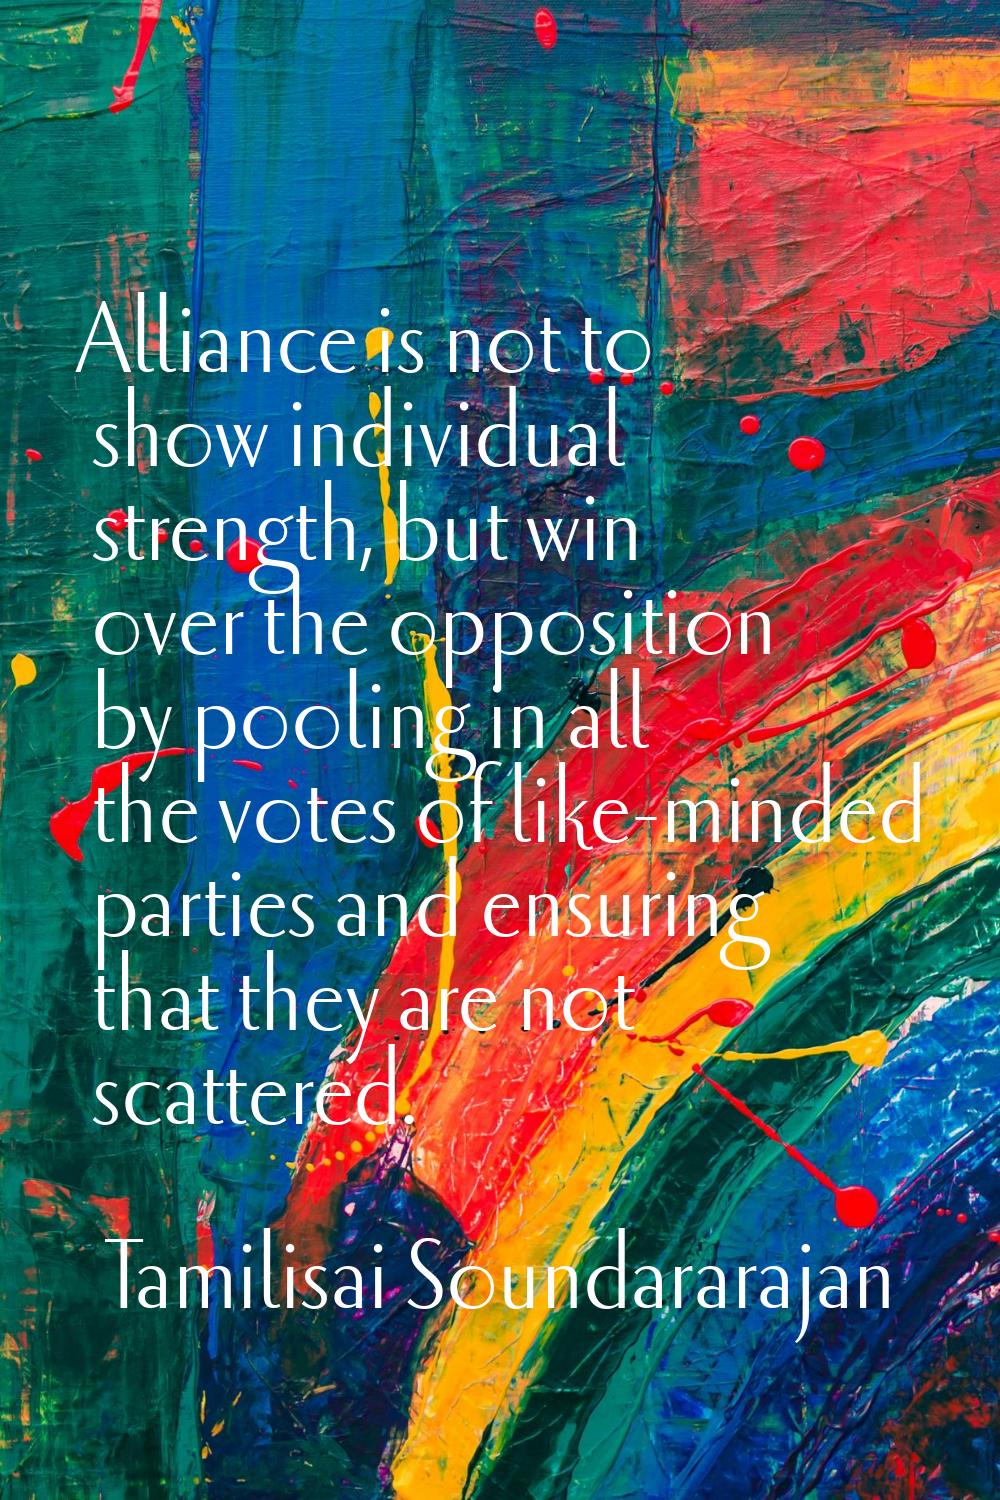 Alliance is not to show individual strength, but win over the opposition by pooling in all the vote